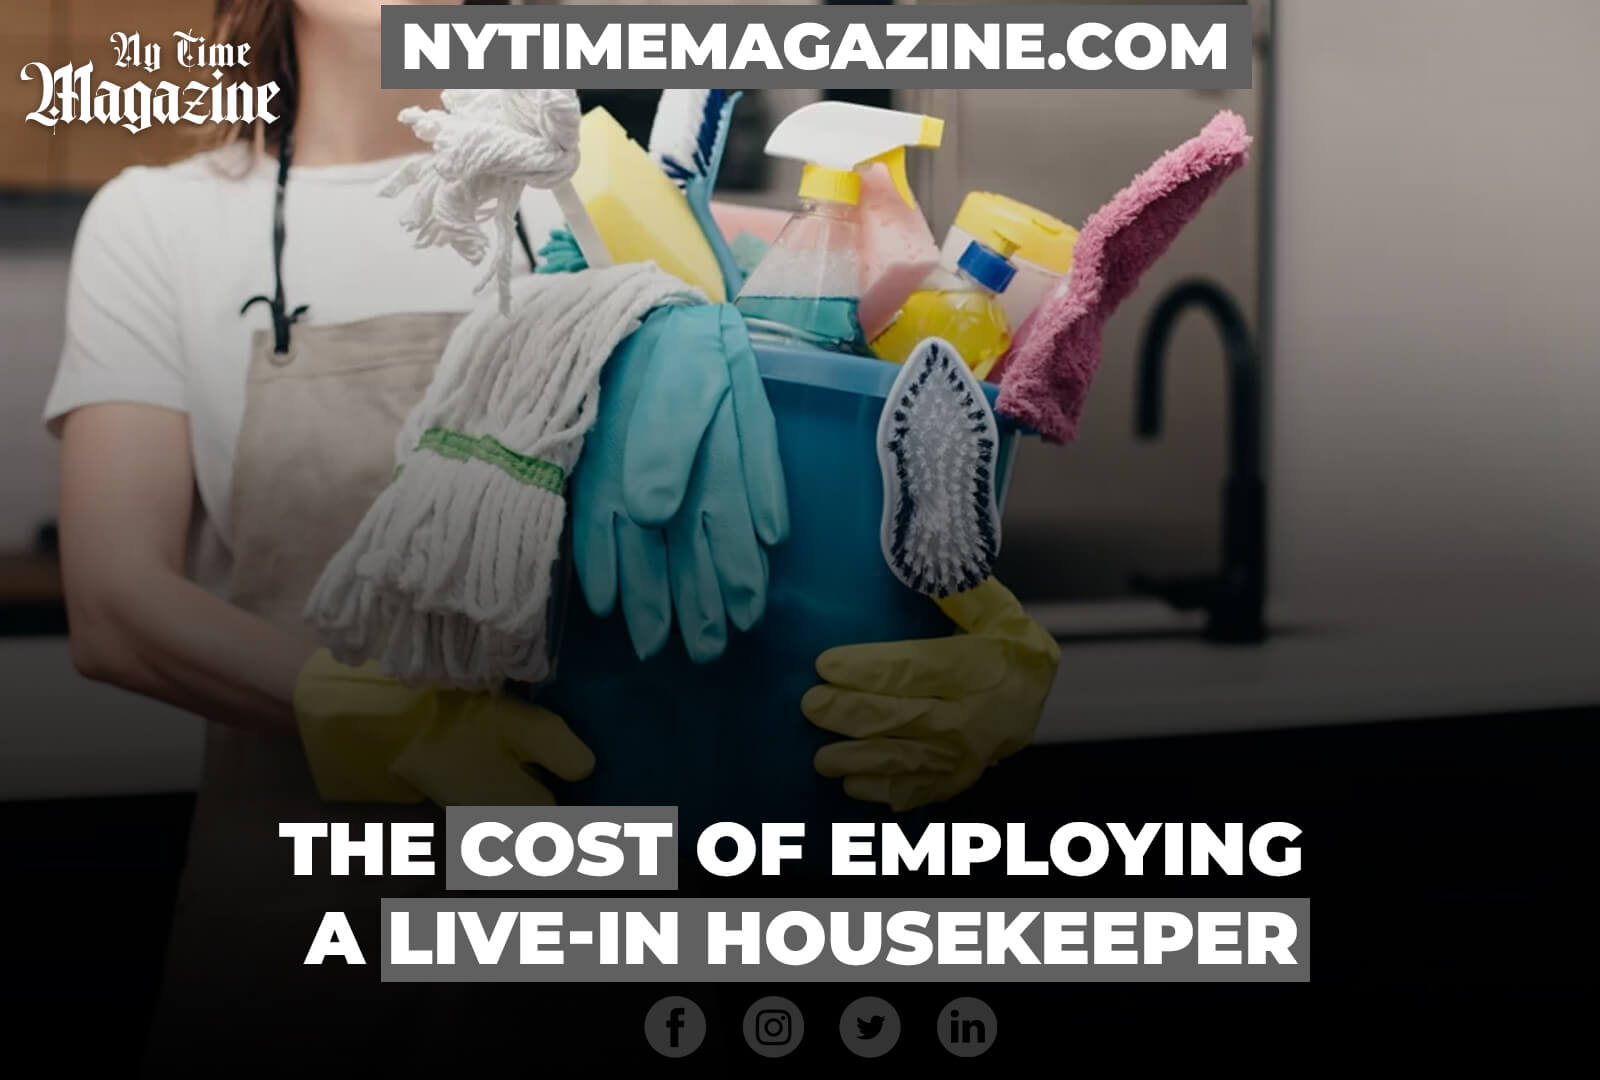 THE COST OF EMPLOYING A LIVE-IN HOUSEKEEPER